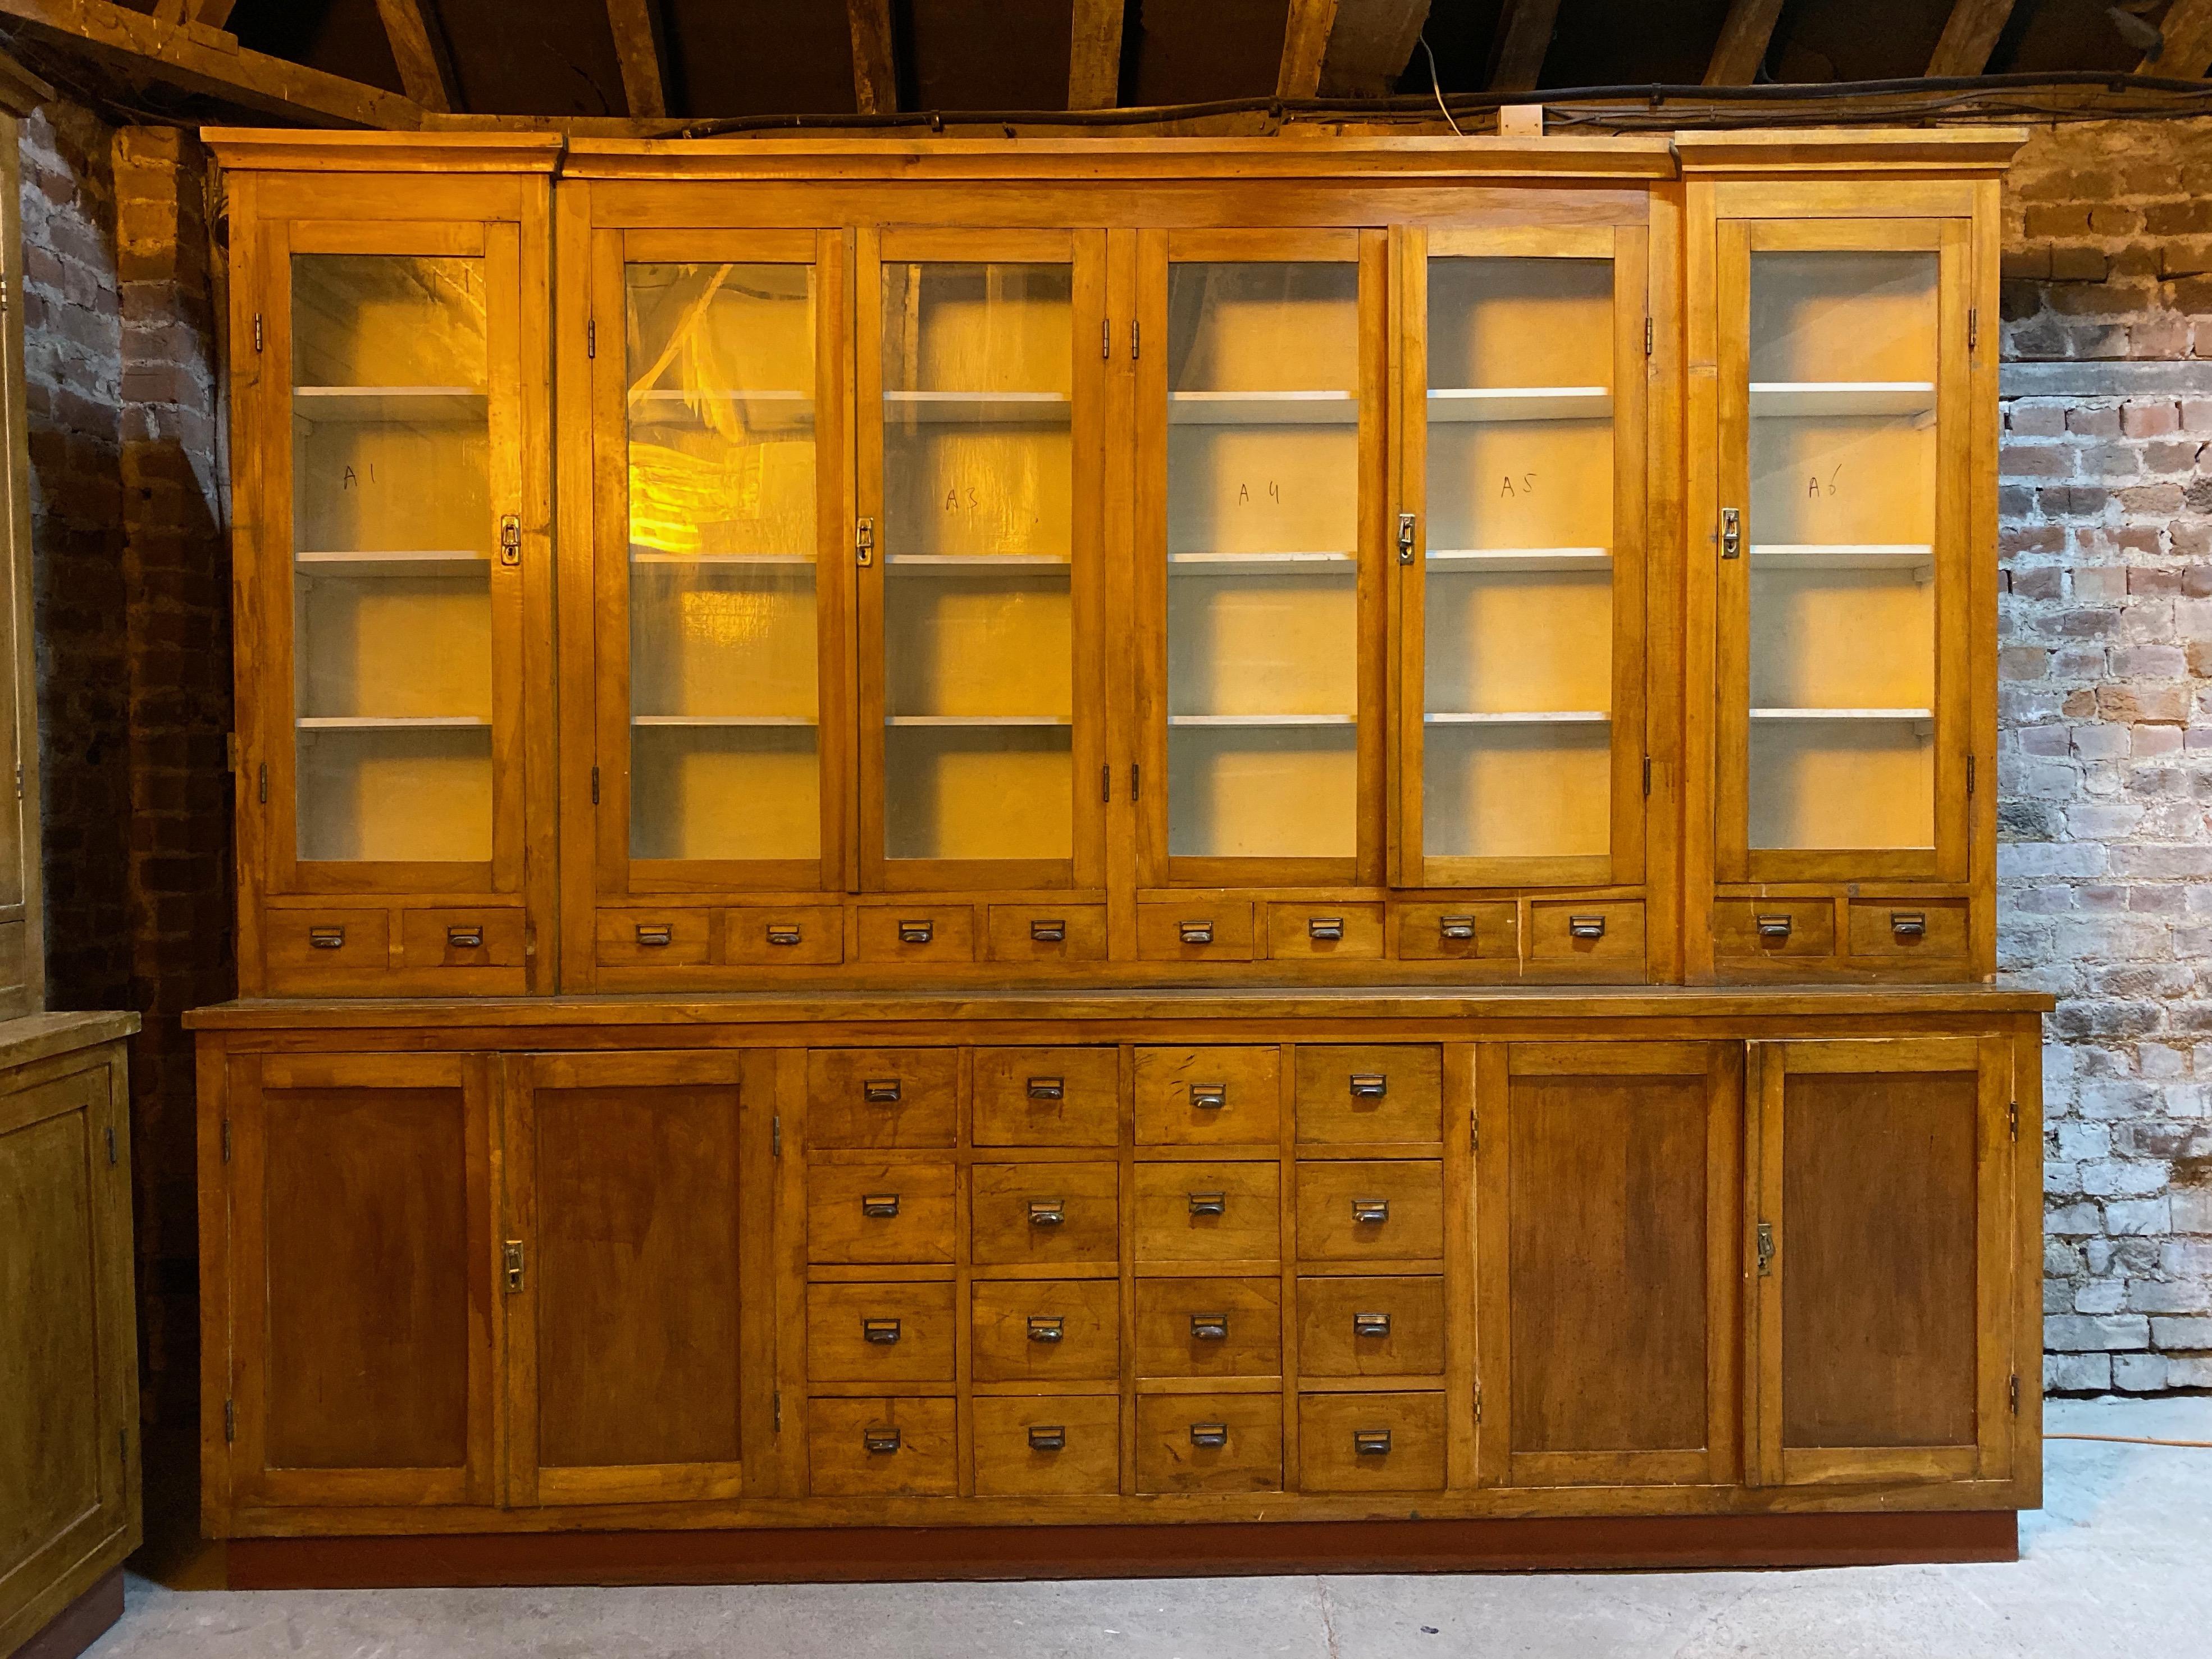 Large apothecary display cabinet pharmacy chemist shop circa 1920s number 4

Magnificent breakfront Apothecary Pharmacy beech display cabinet dating to circa 1920s, This piece is one of six similar pieces all from the same pharmacy, the upper